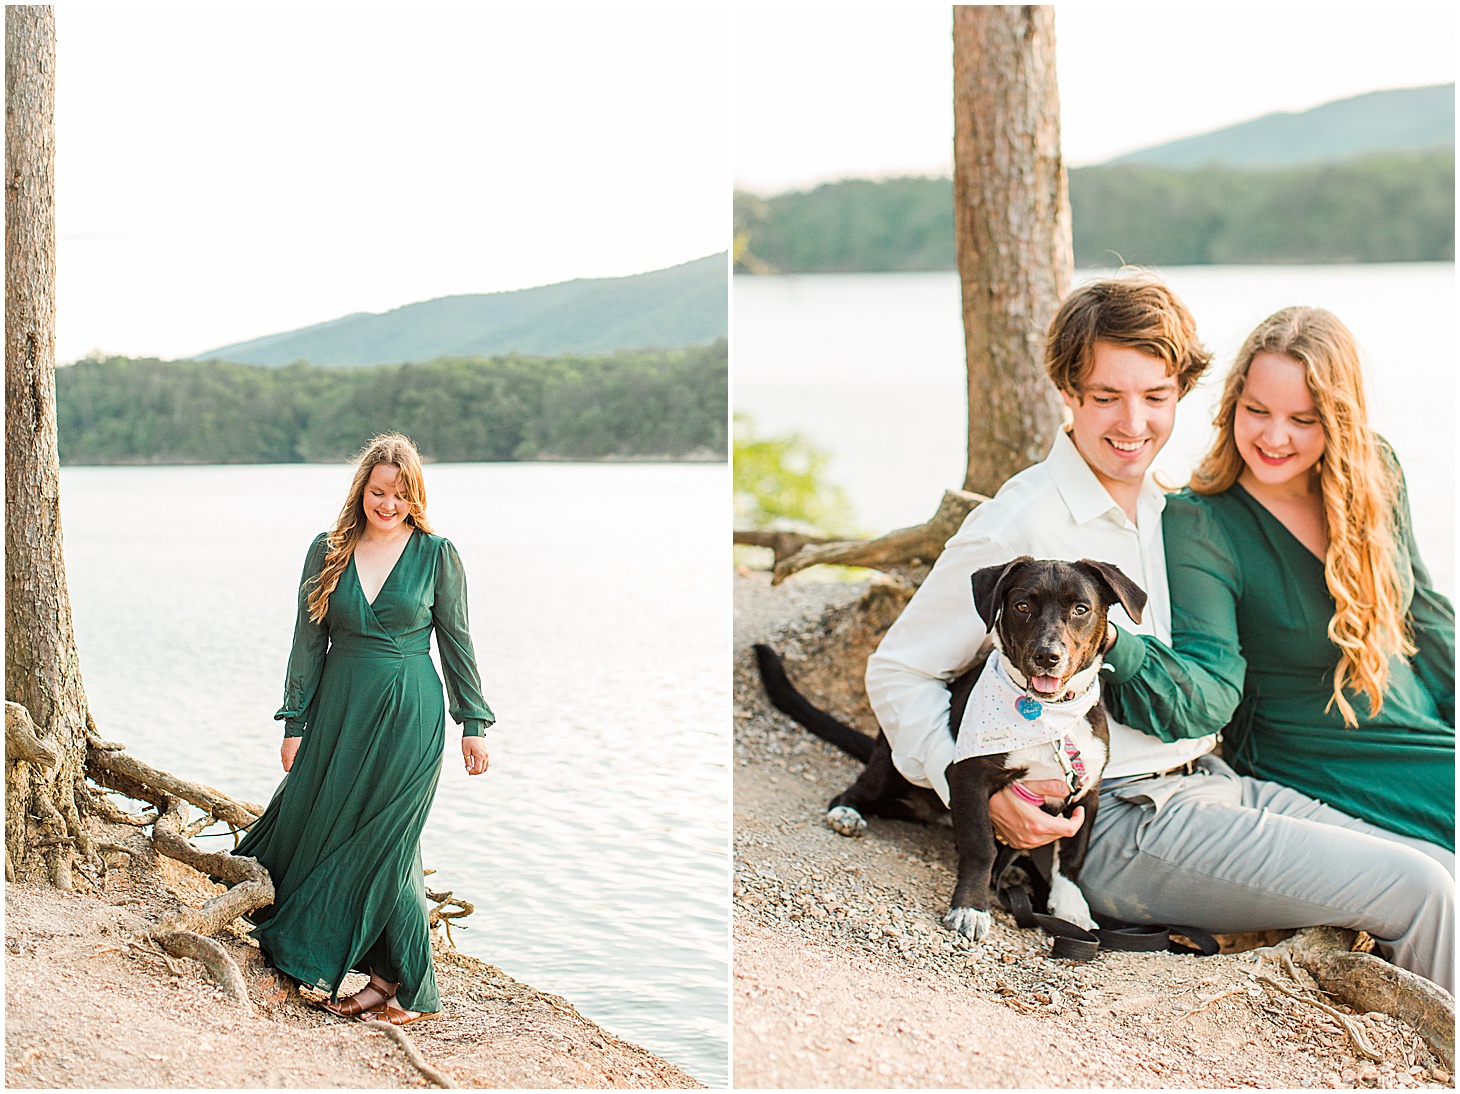 carvinscoveengagementsession_roanokeengagementsession_carvinscove_virginiawedding_virginiaweddingphotographer_vaweddingphotographer_photo_0060.jpg